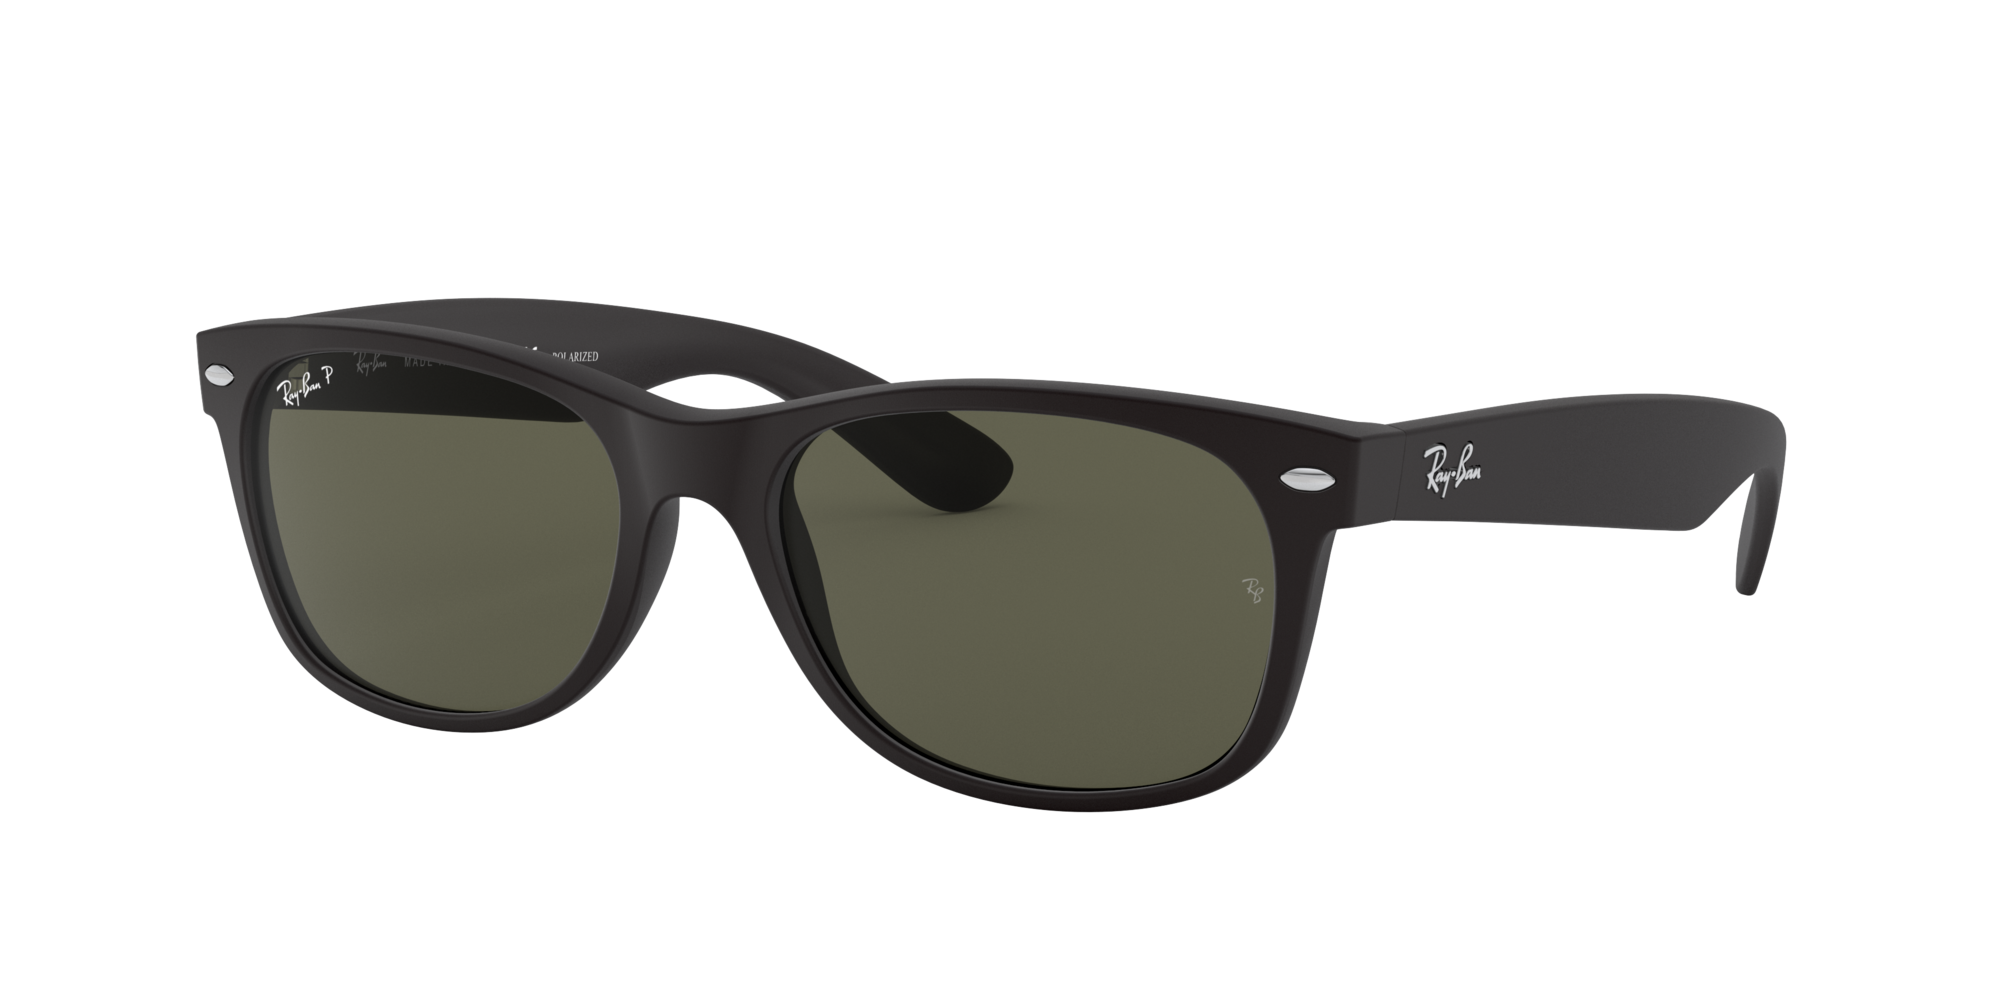 Ray Ban 0rb2132 Sunglasses In Black Target Optical